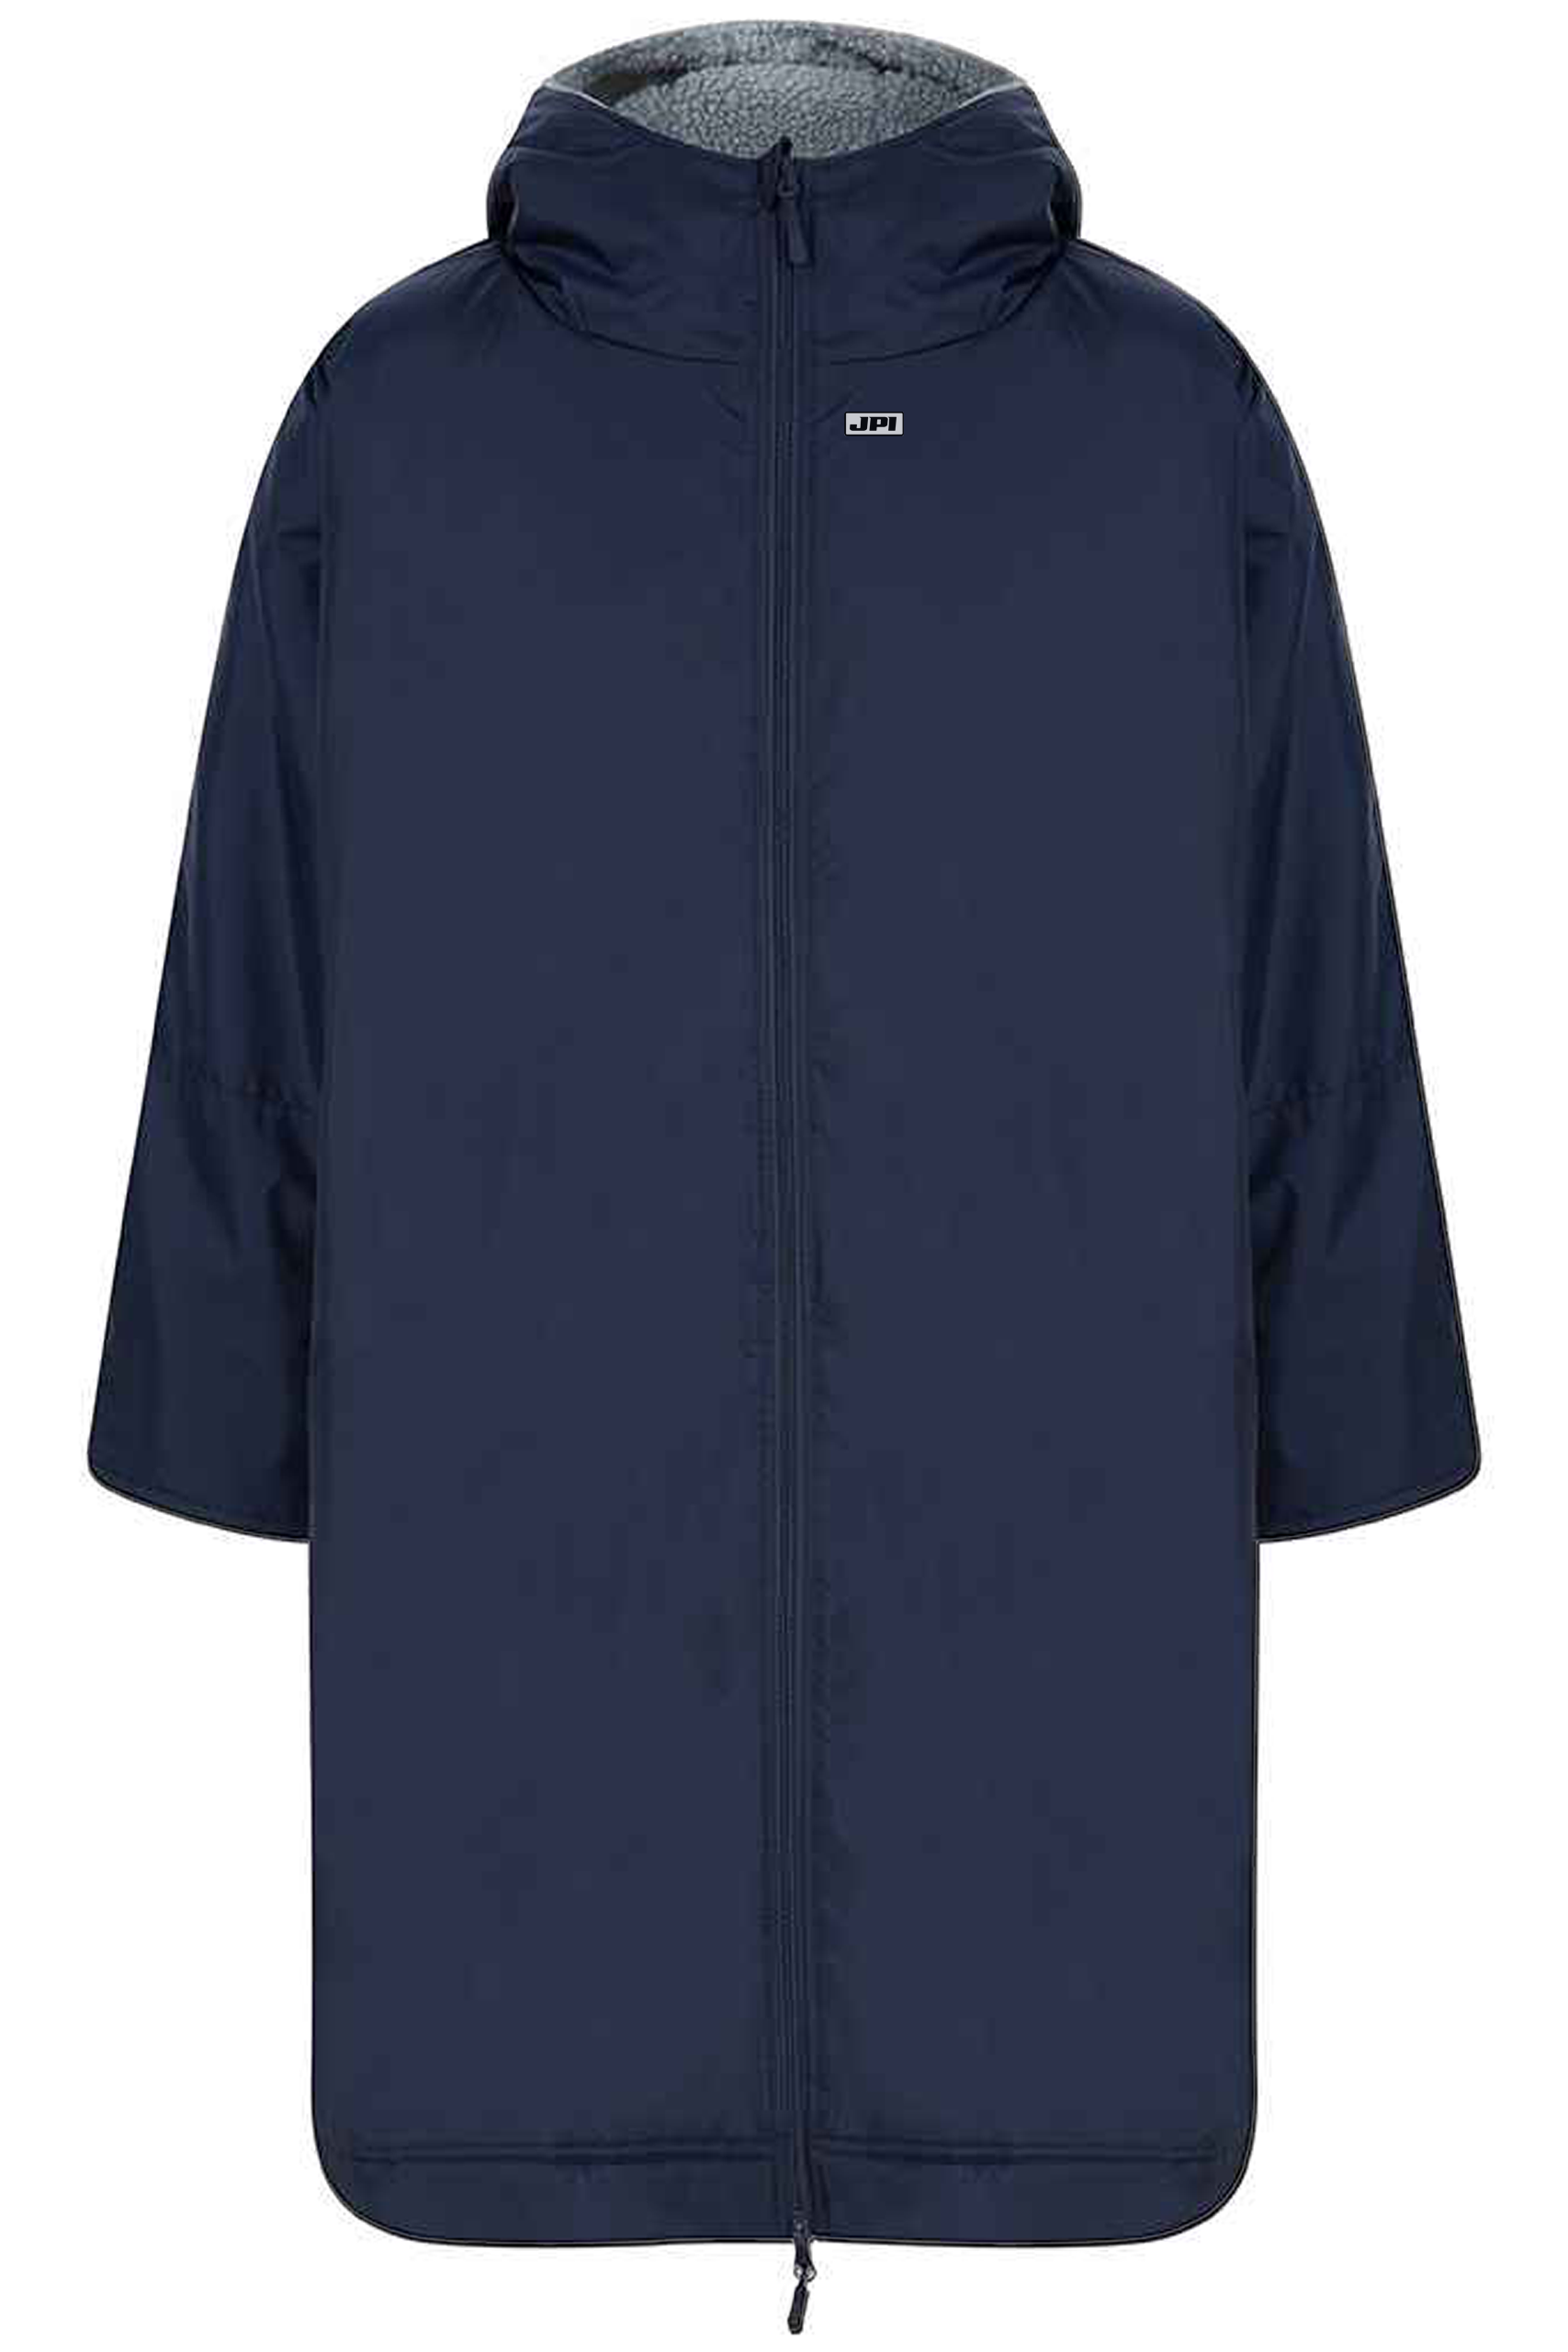 JPI Robe. All weather robe, teddy fleece lining, waterproof and windproof. Picture shows navy robe.